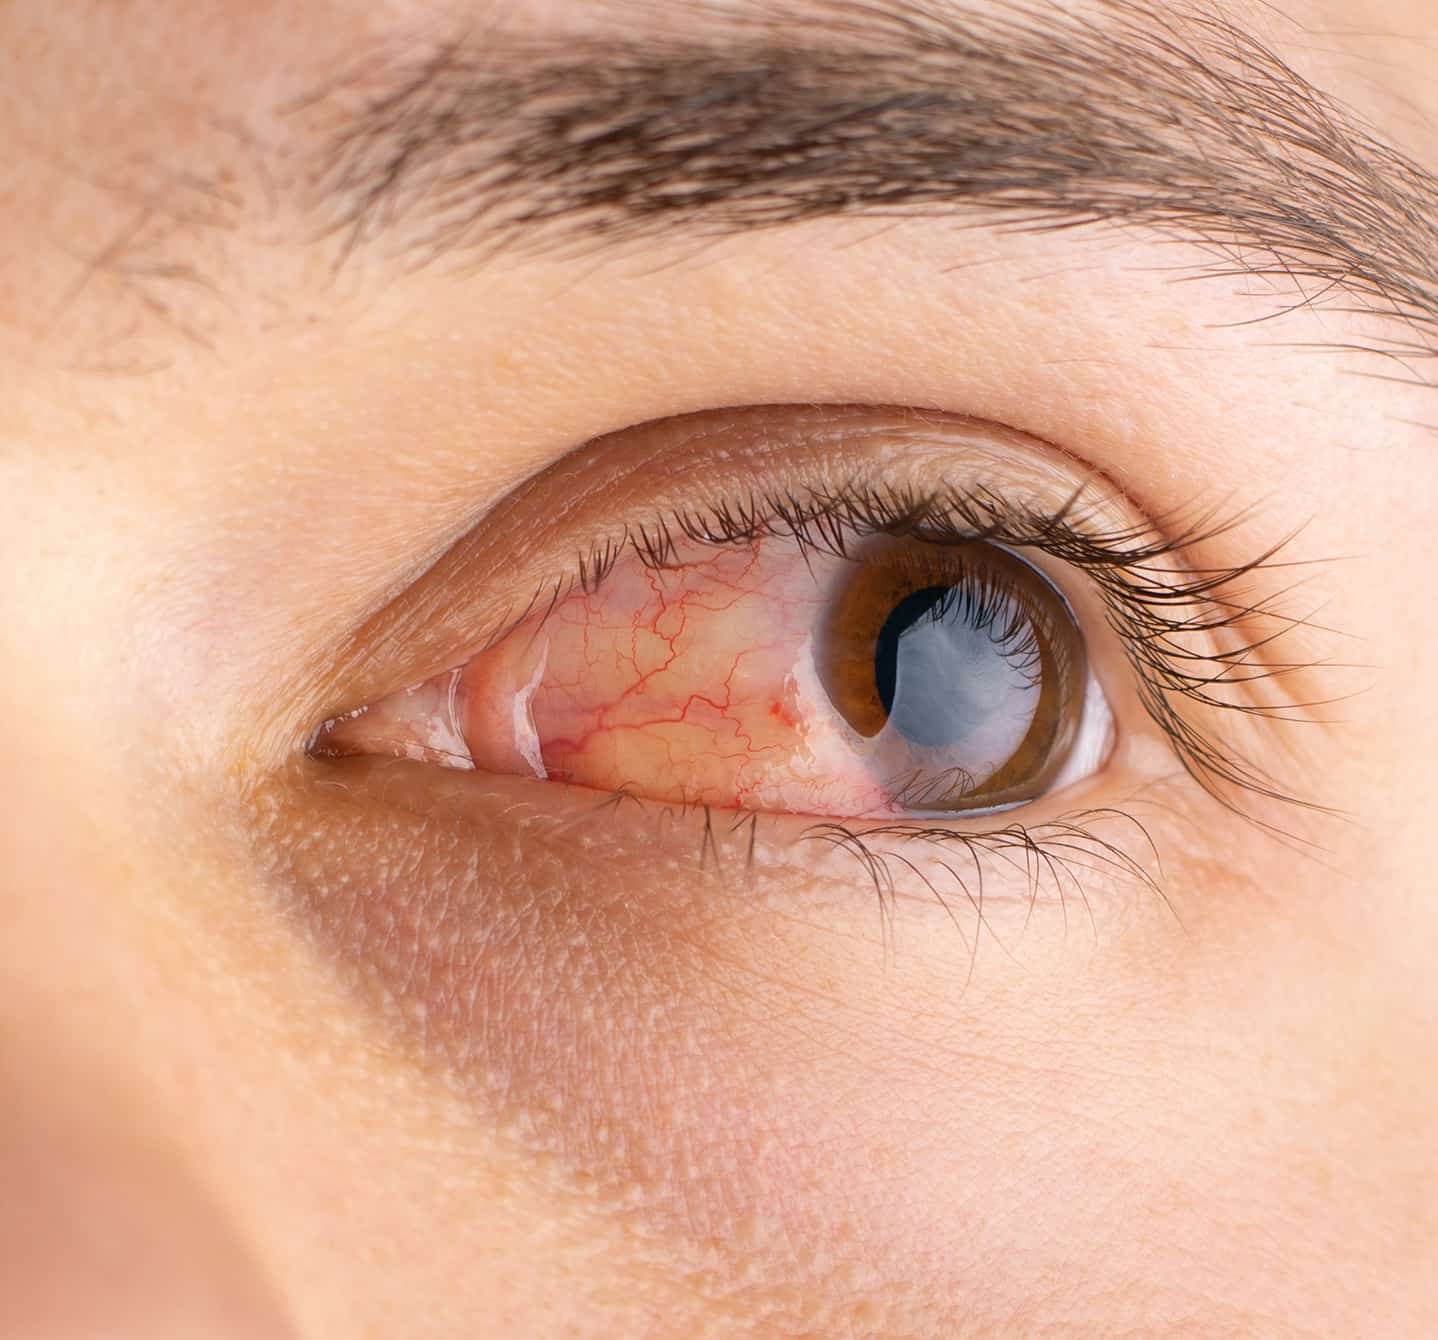  Close up of a brown eye with allergic conjunctivitis, it is watery and sore